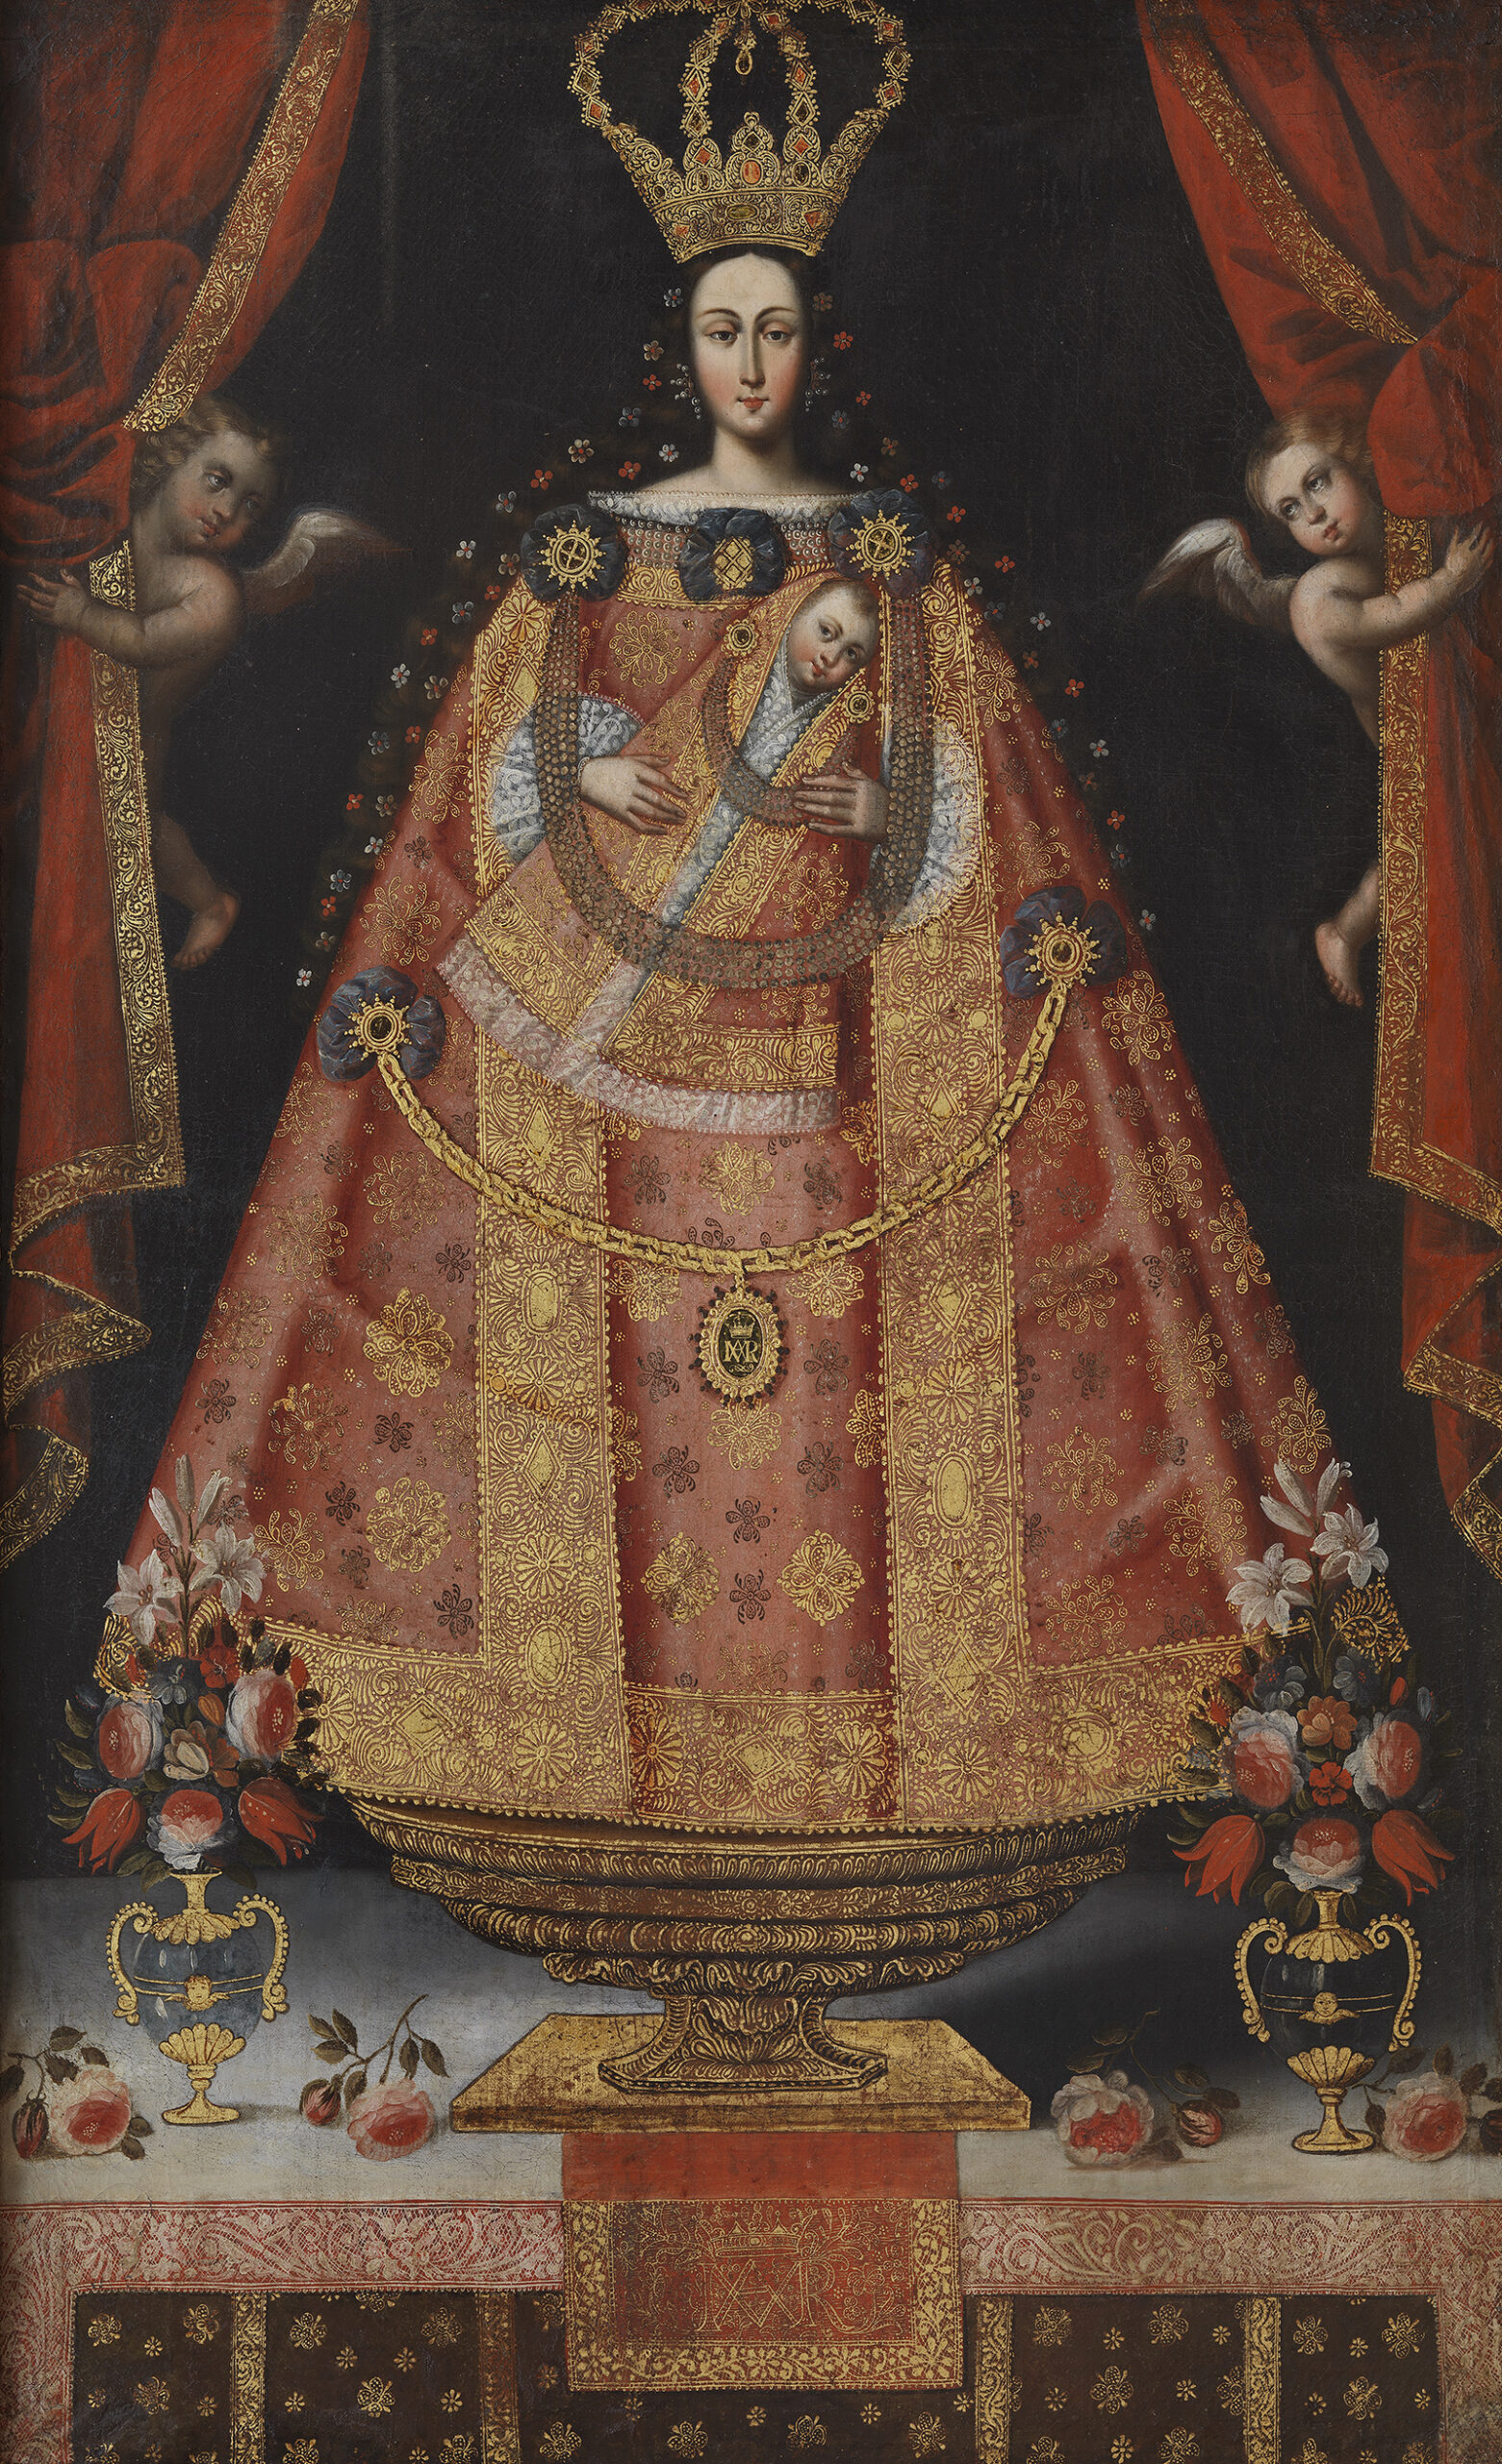 Virgin of Bethlehem standing on a gold platform holding a child with cherubs holding back red velvet curtains on either side of her.